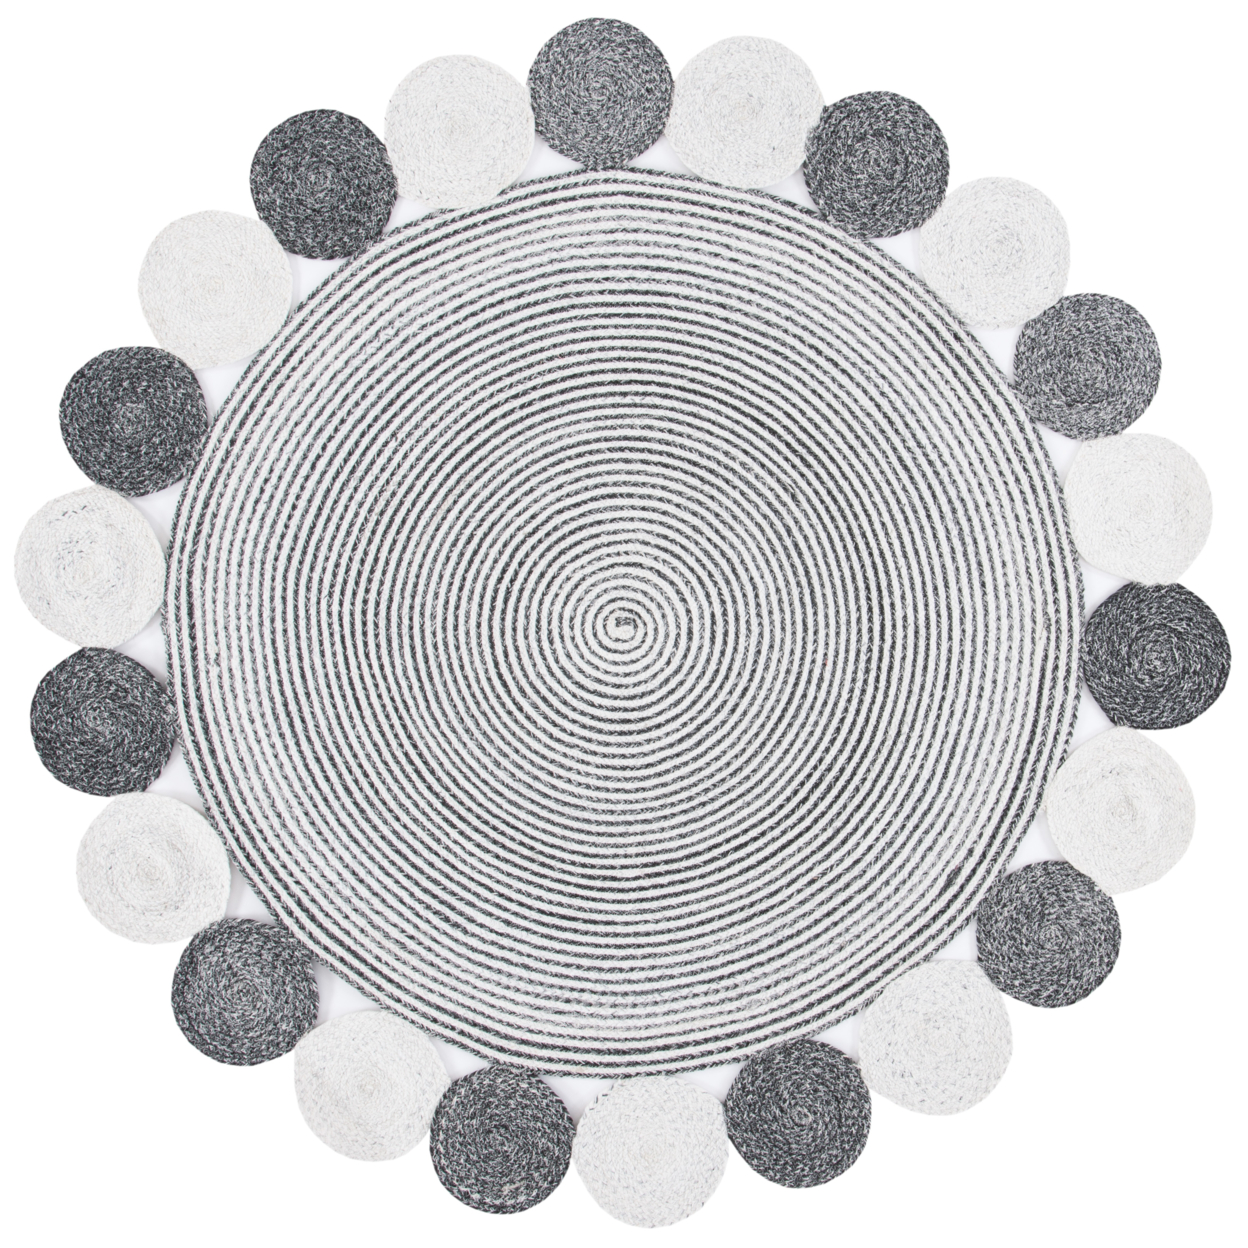 SAFAVIEH Cape Cod CAP231H Handwoven Charcoal / Ivory Rug - 6' Round